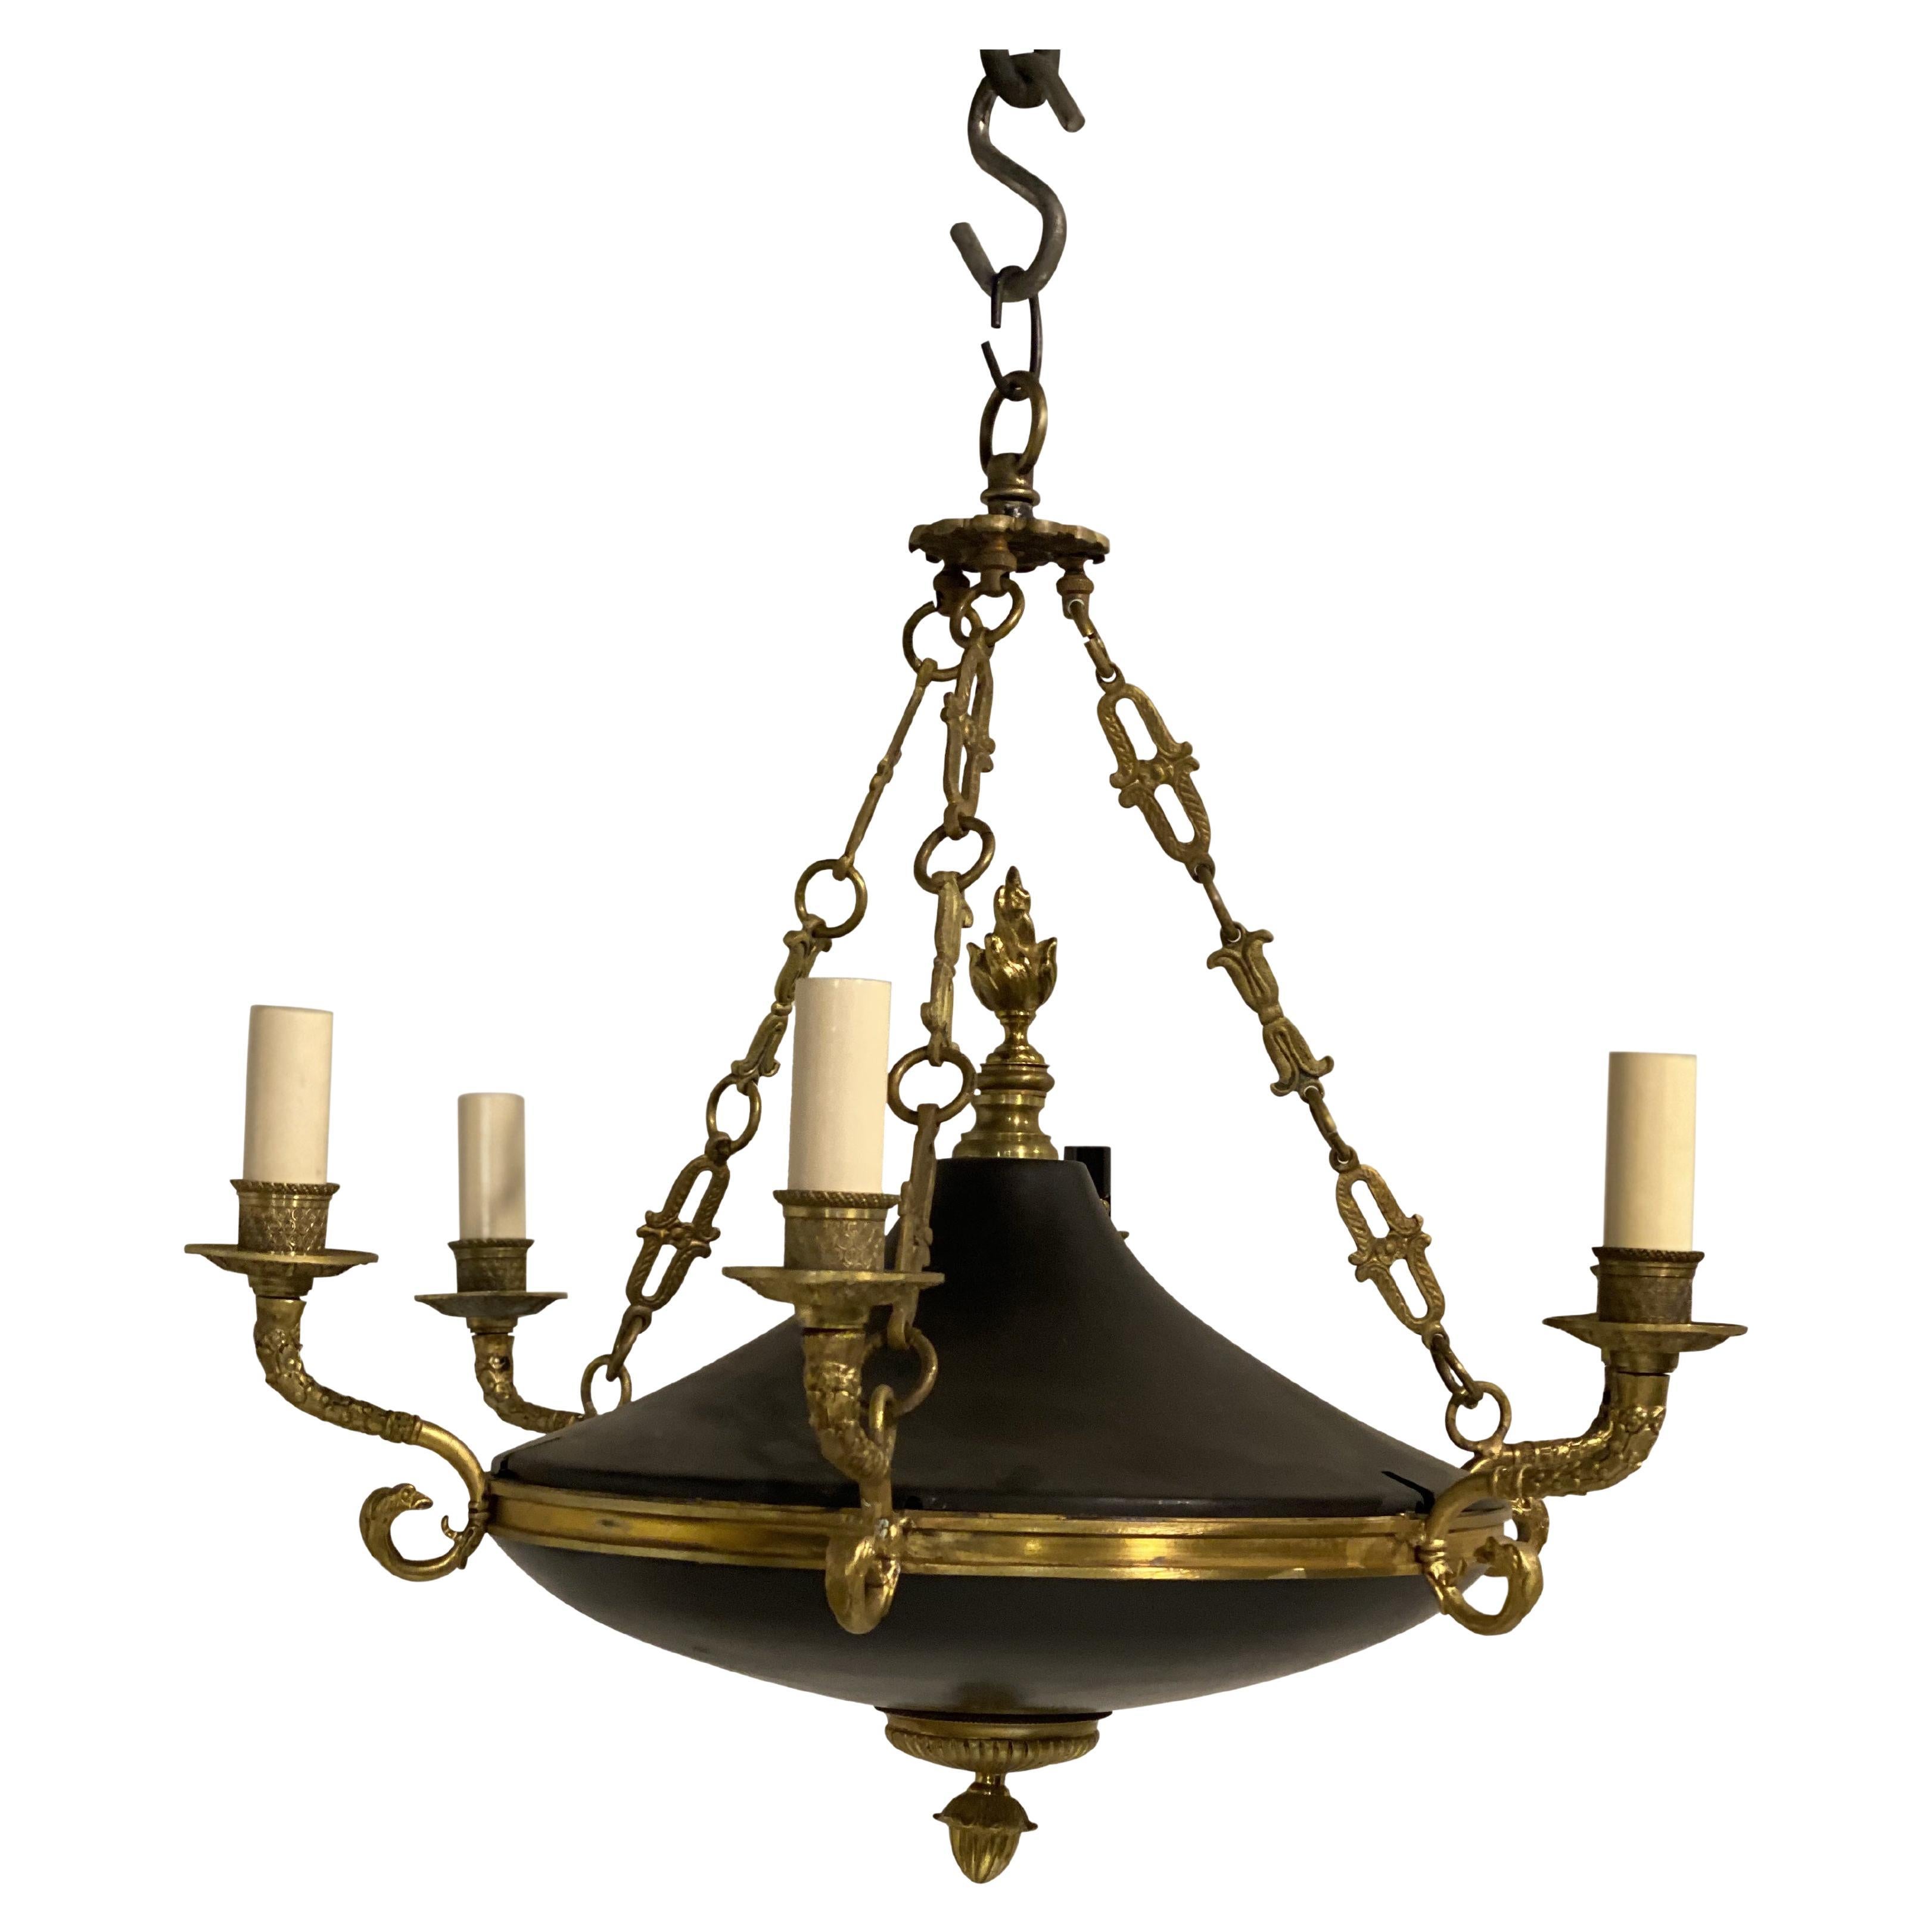 1900 French Empire Chandelier